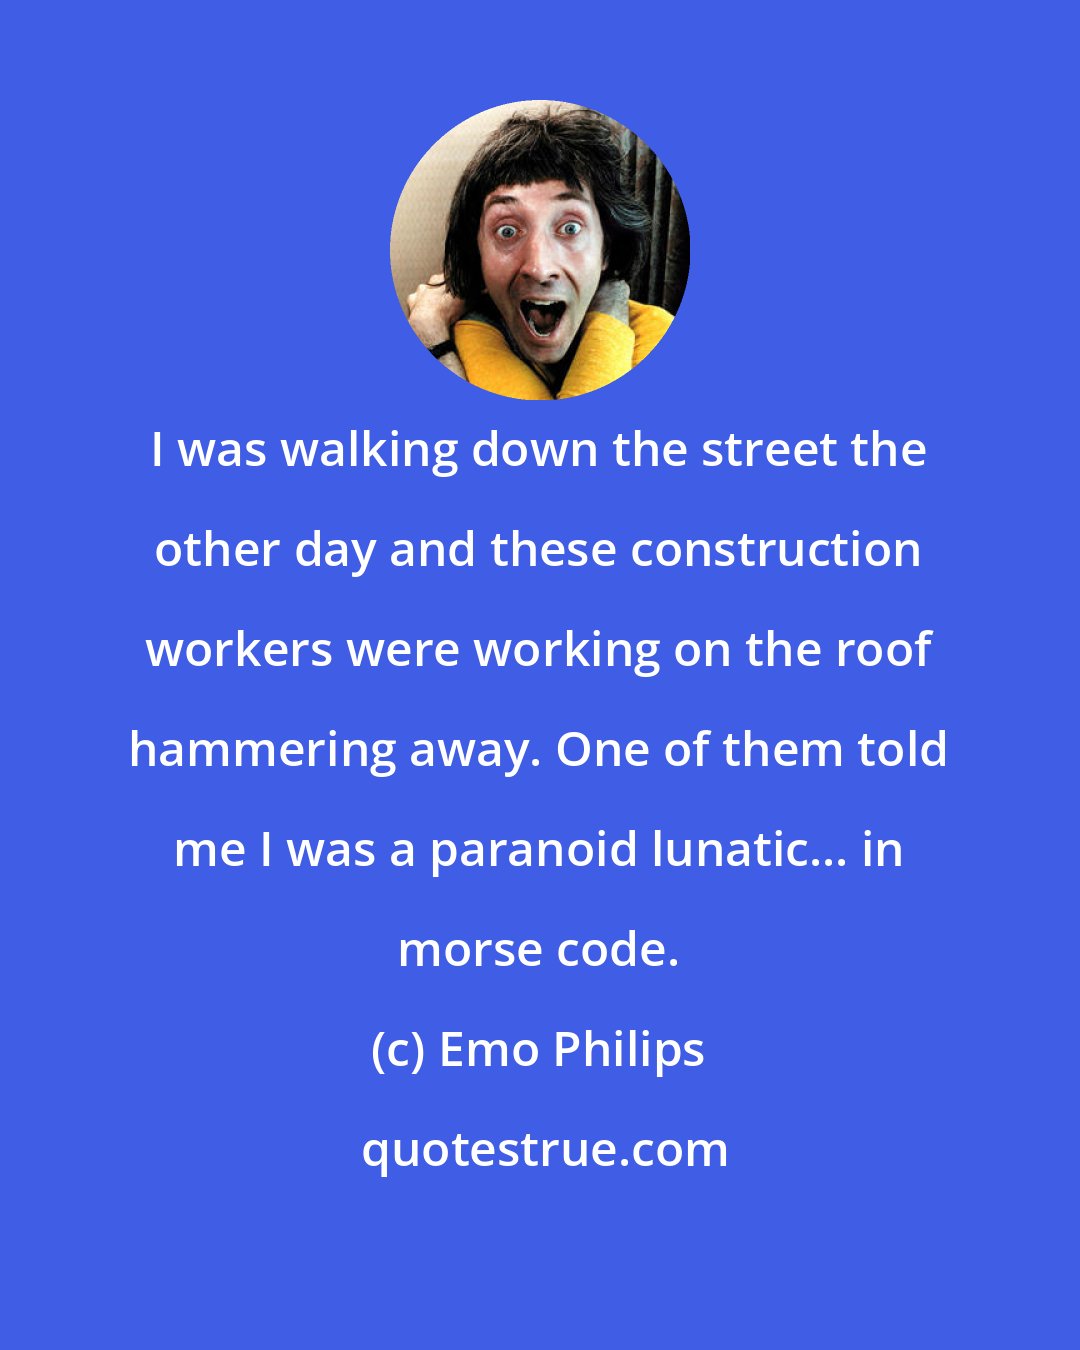 Emo Philips: I was walking down the street the other day and these construction workers were working on the roof hammering away. One of them told me I was a paranoid lunatic... in morse code.